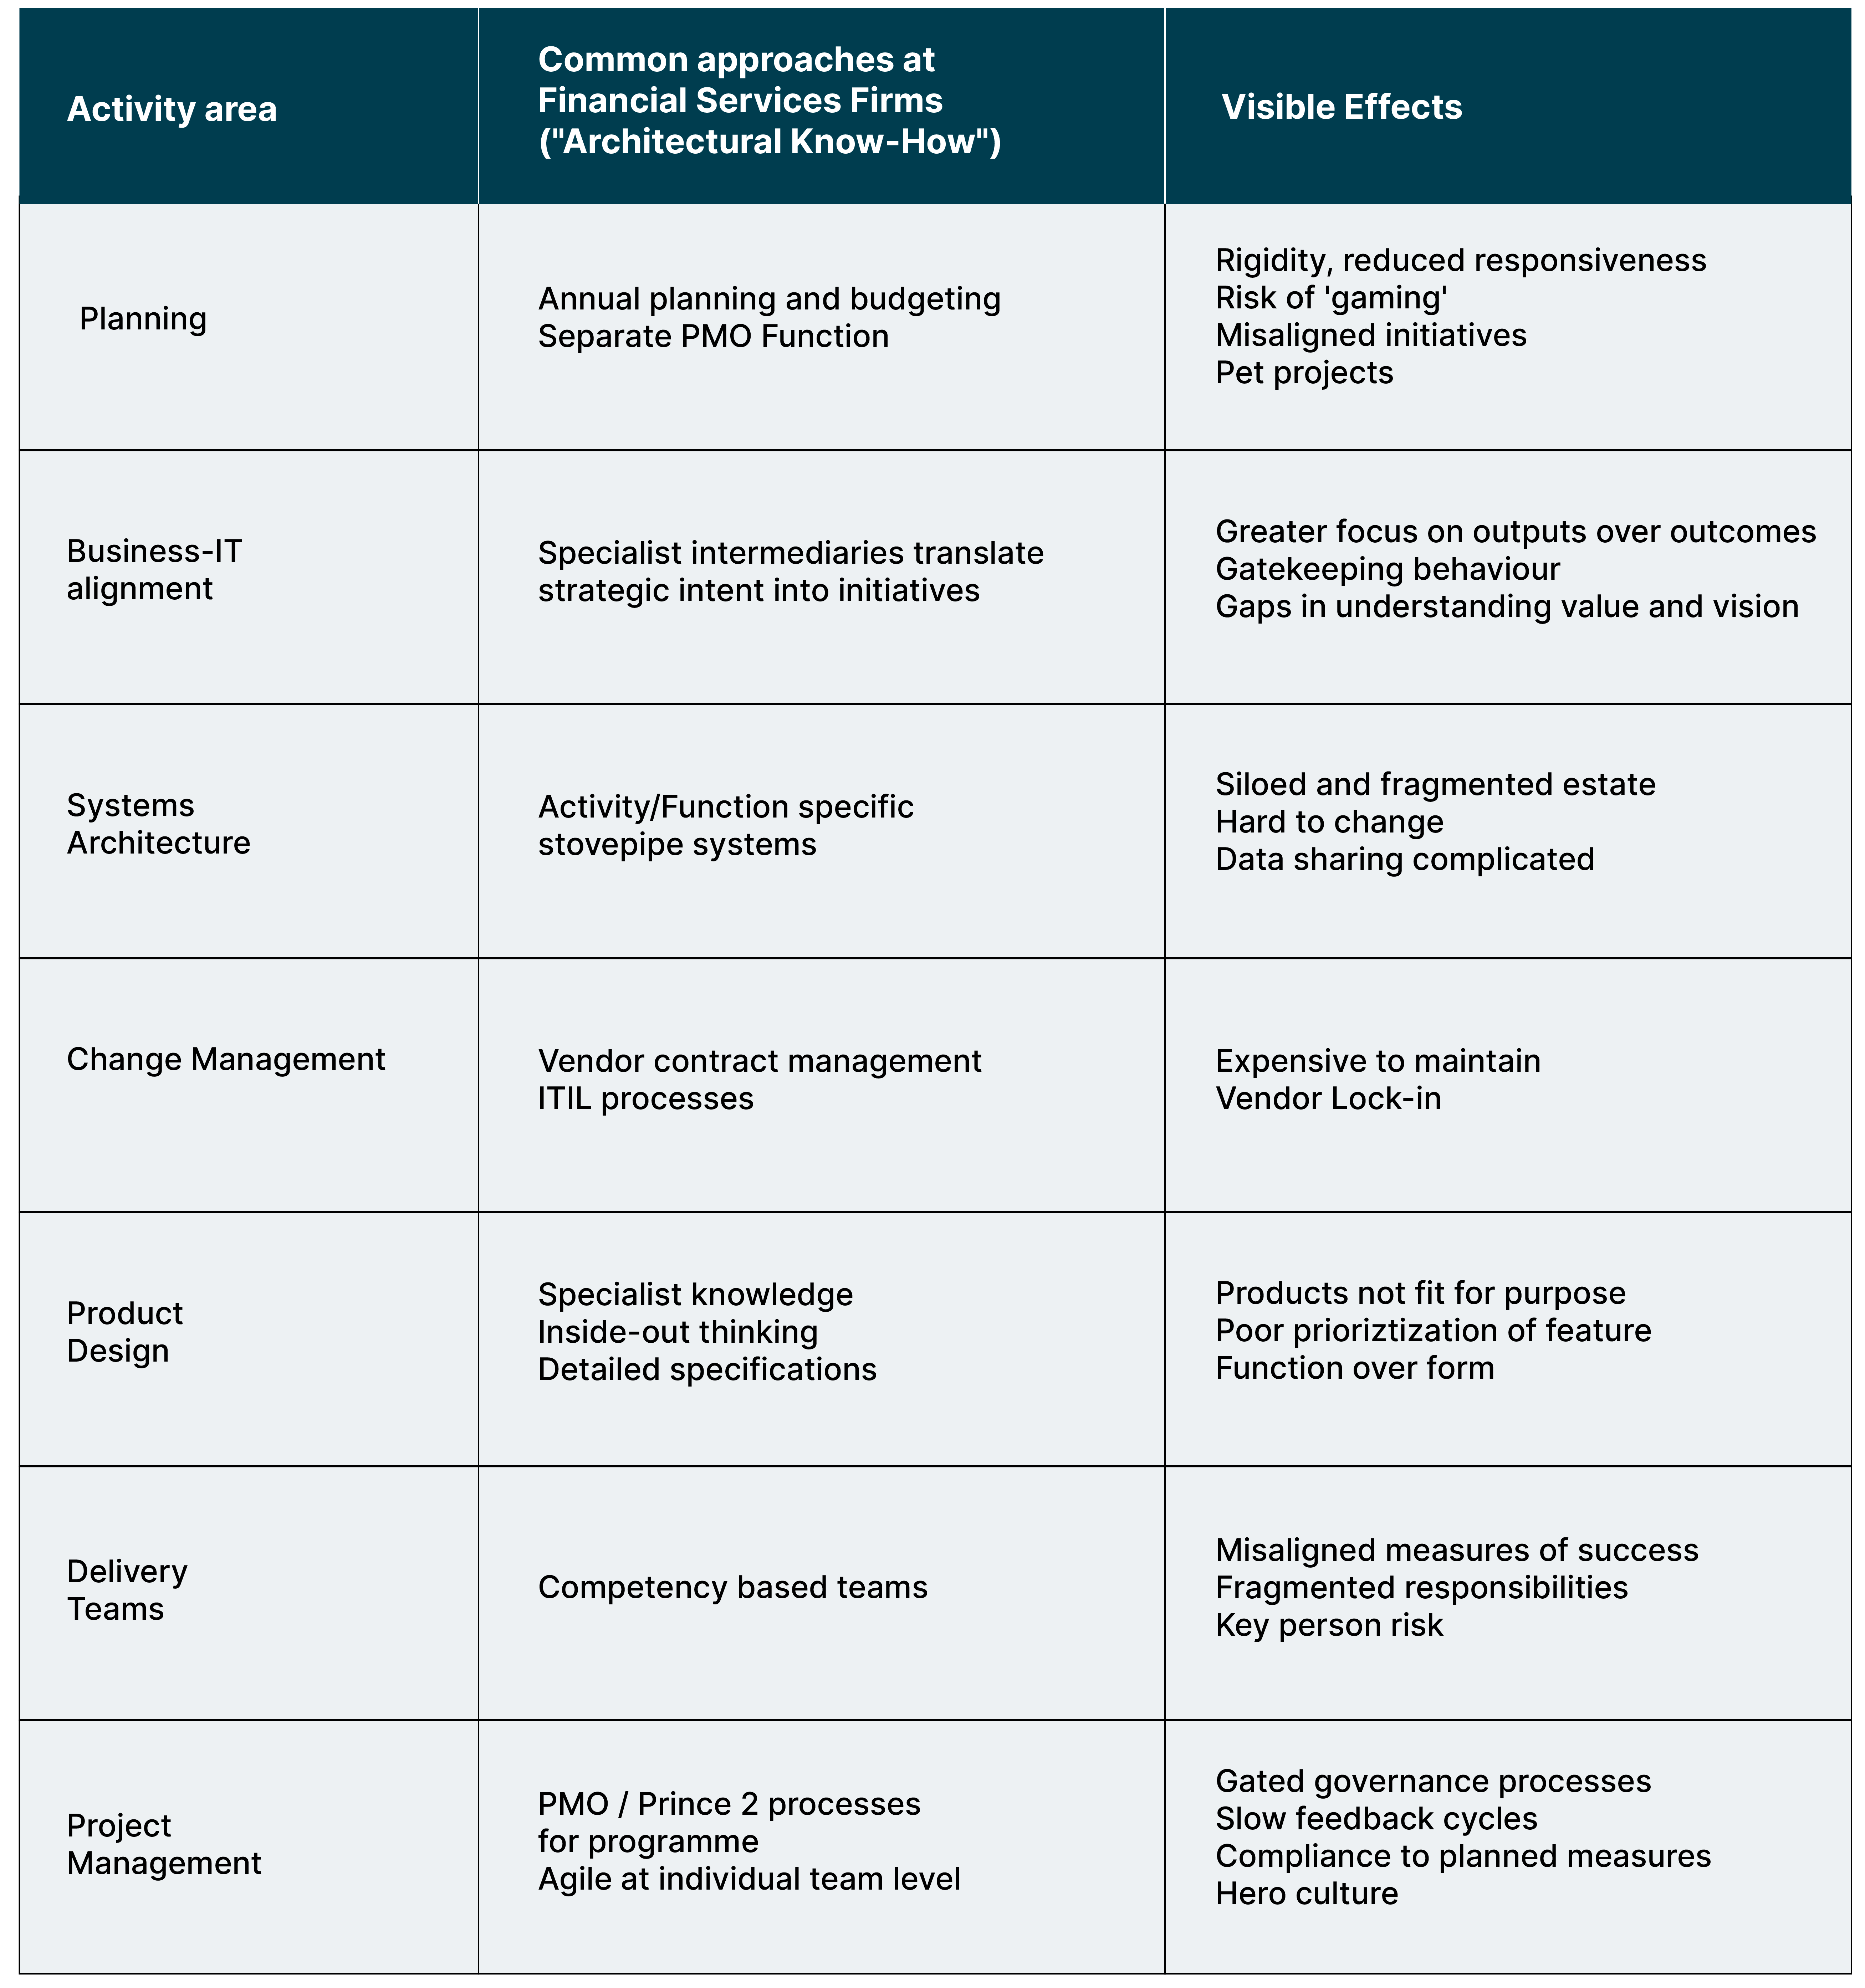 Table outlining activity area, common approaches at FS firms and visible effects